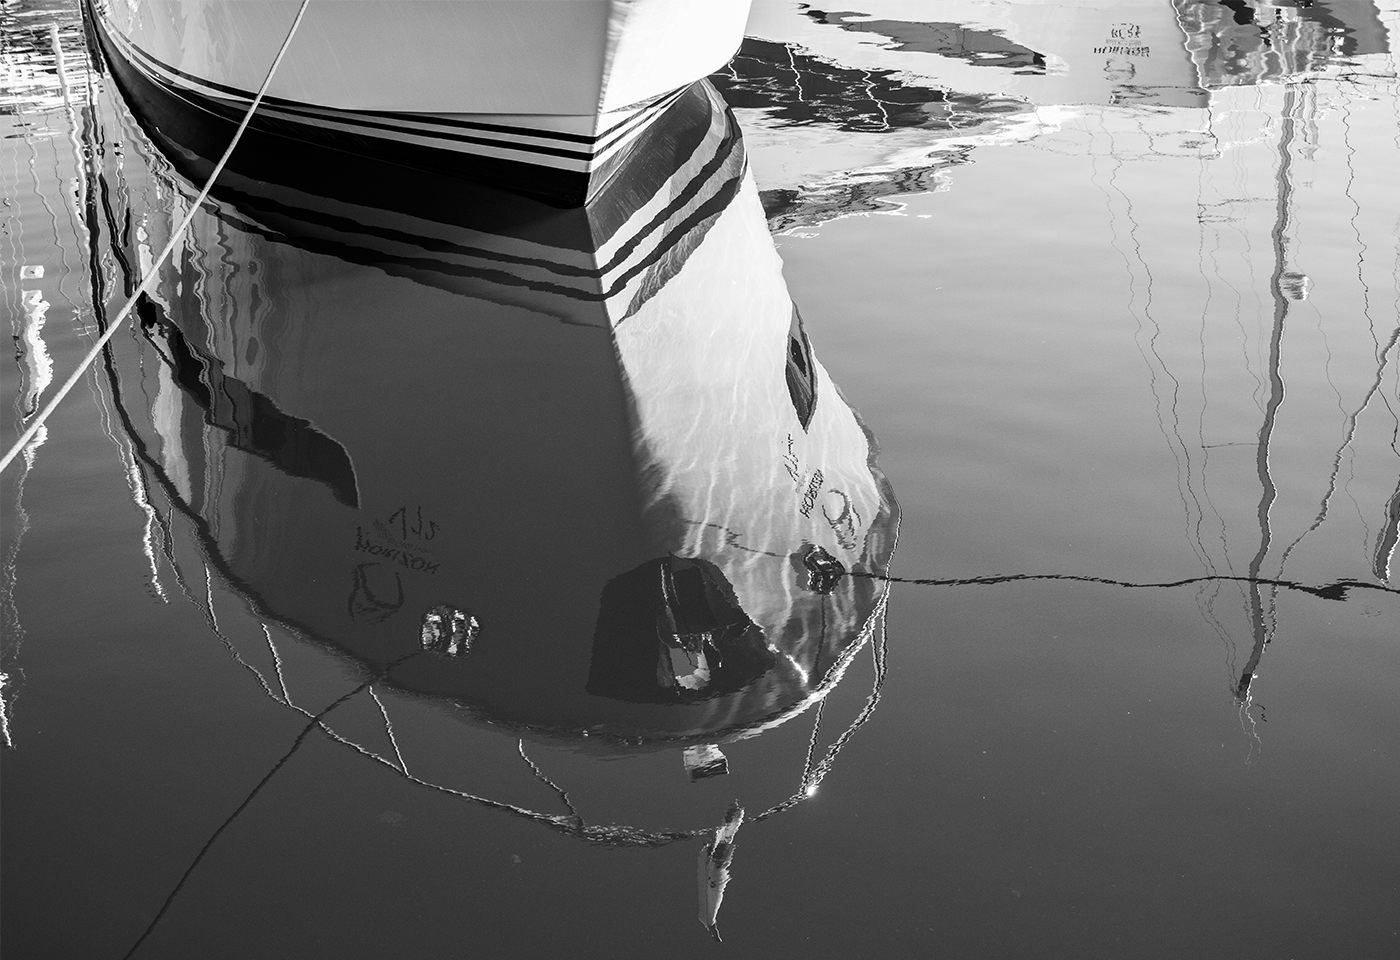 Black and white reflection of boat on water